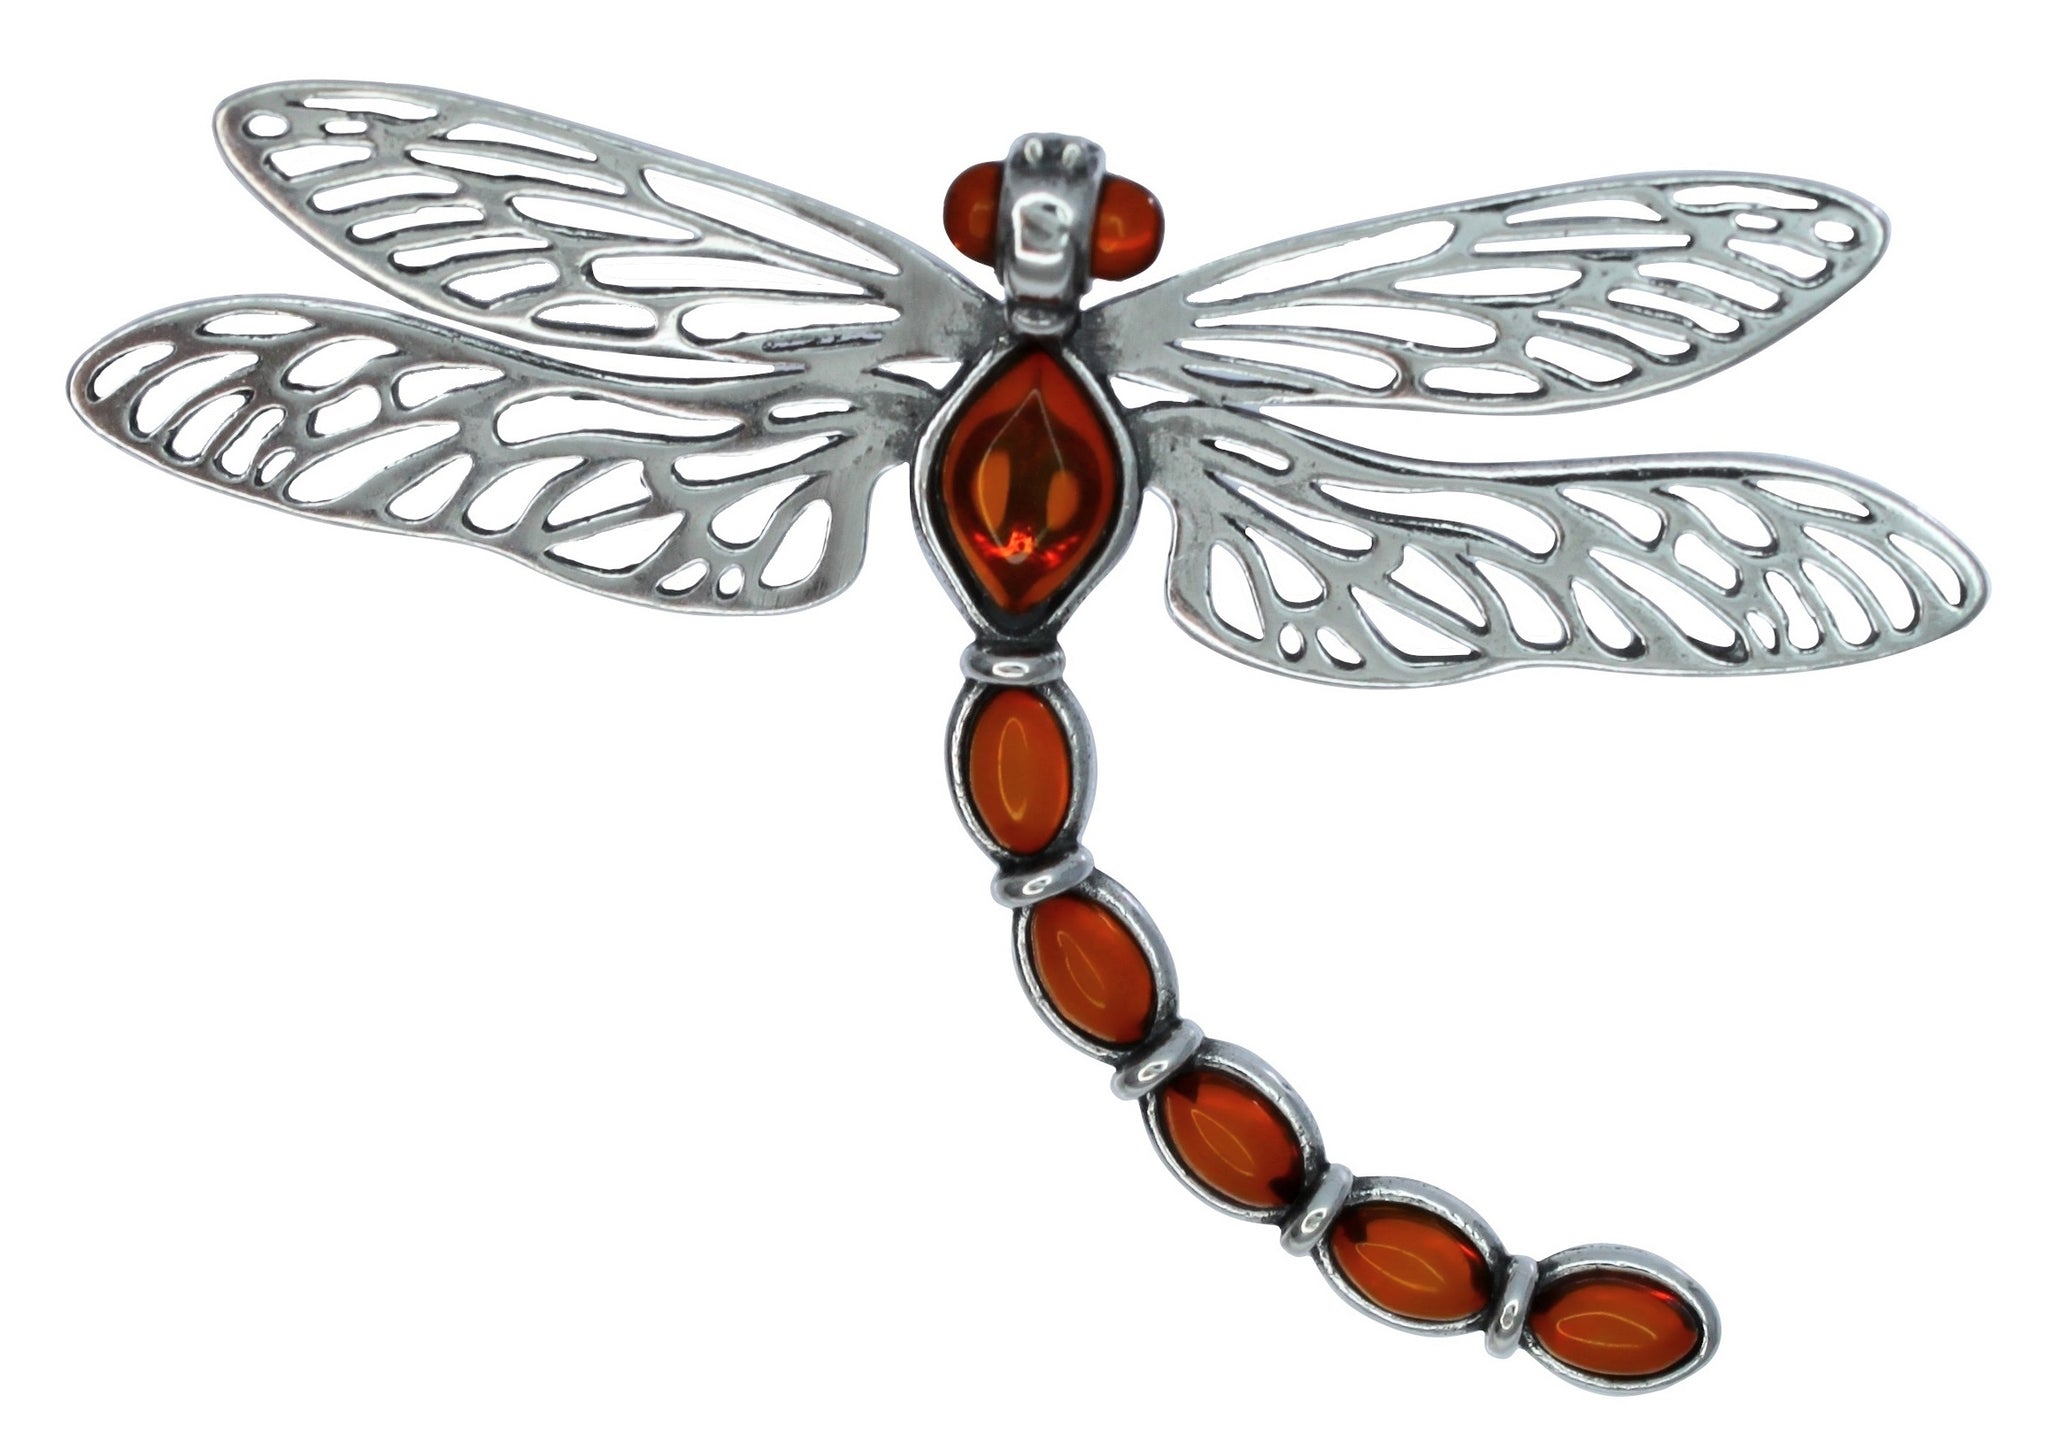 Genuine Baltic Amber Dragonfly Pendent - 925 Sterling Silver